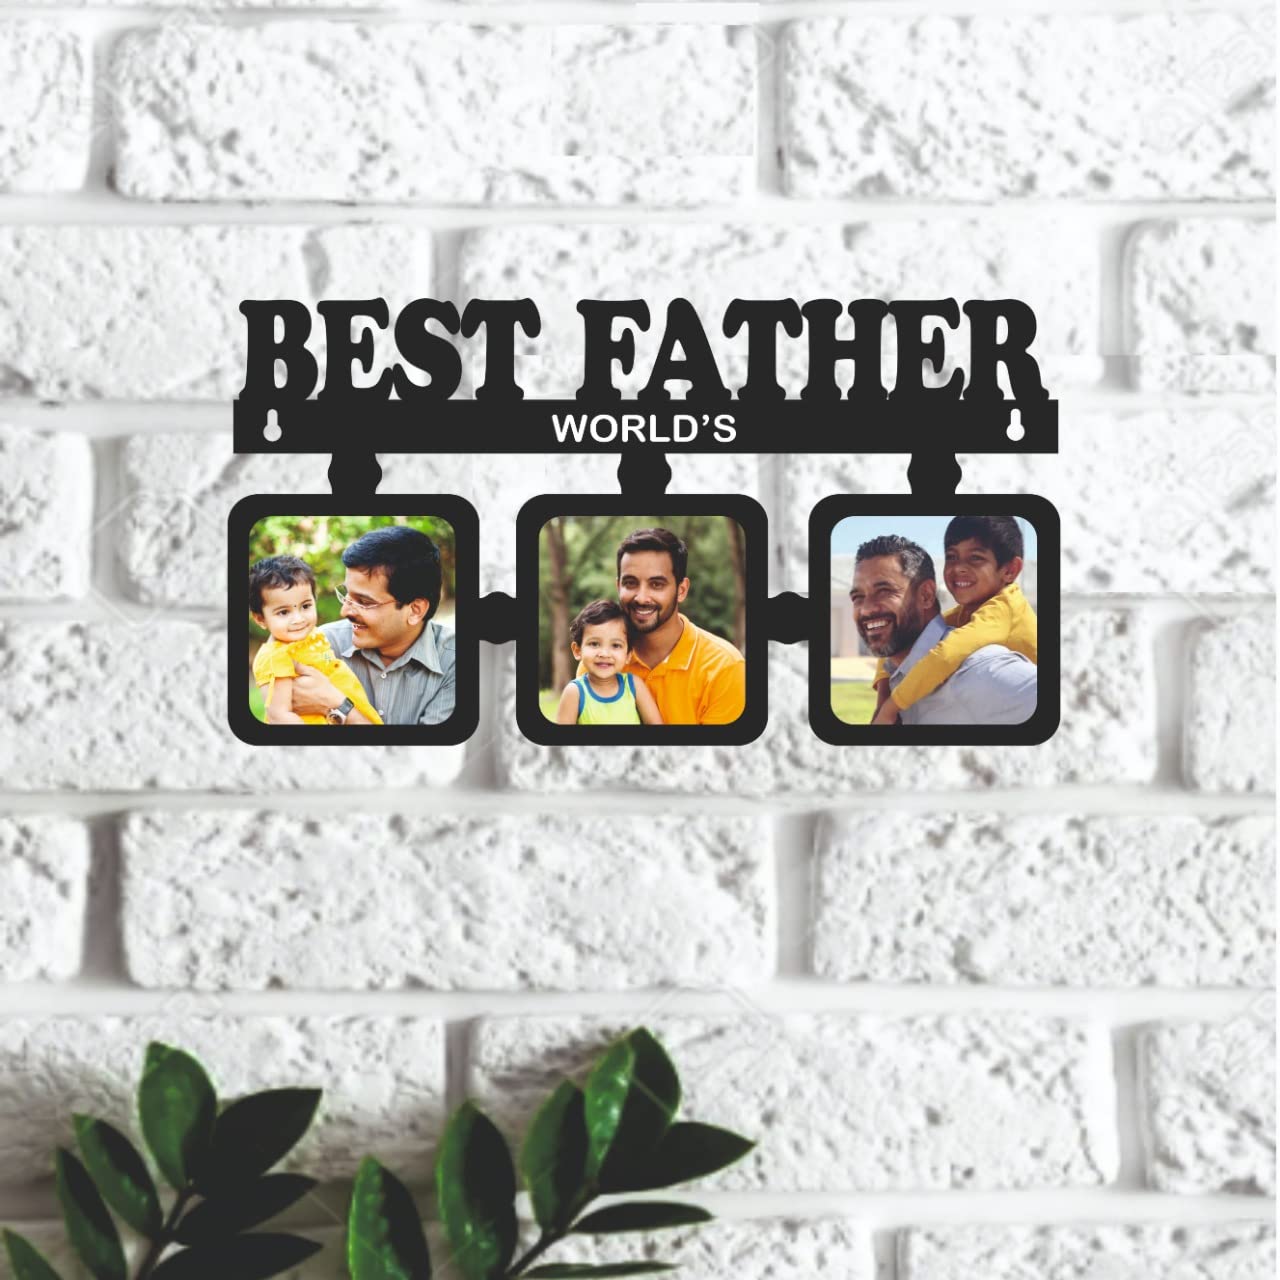 Best Father Wall Hanging